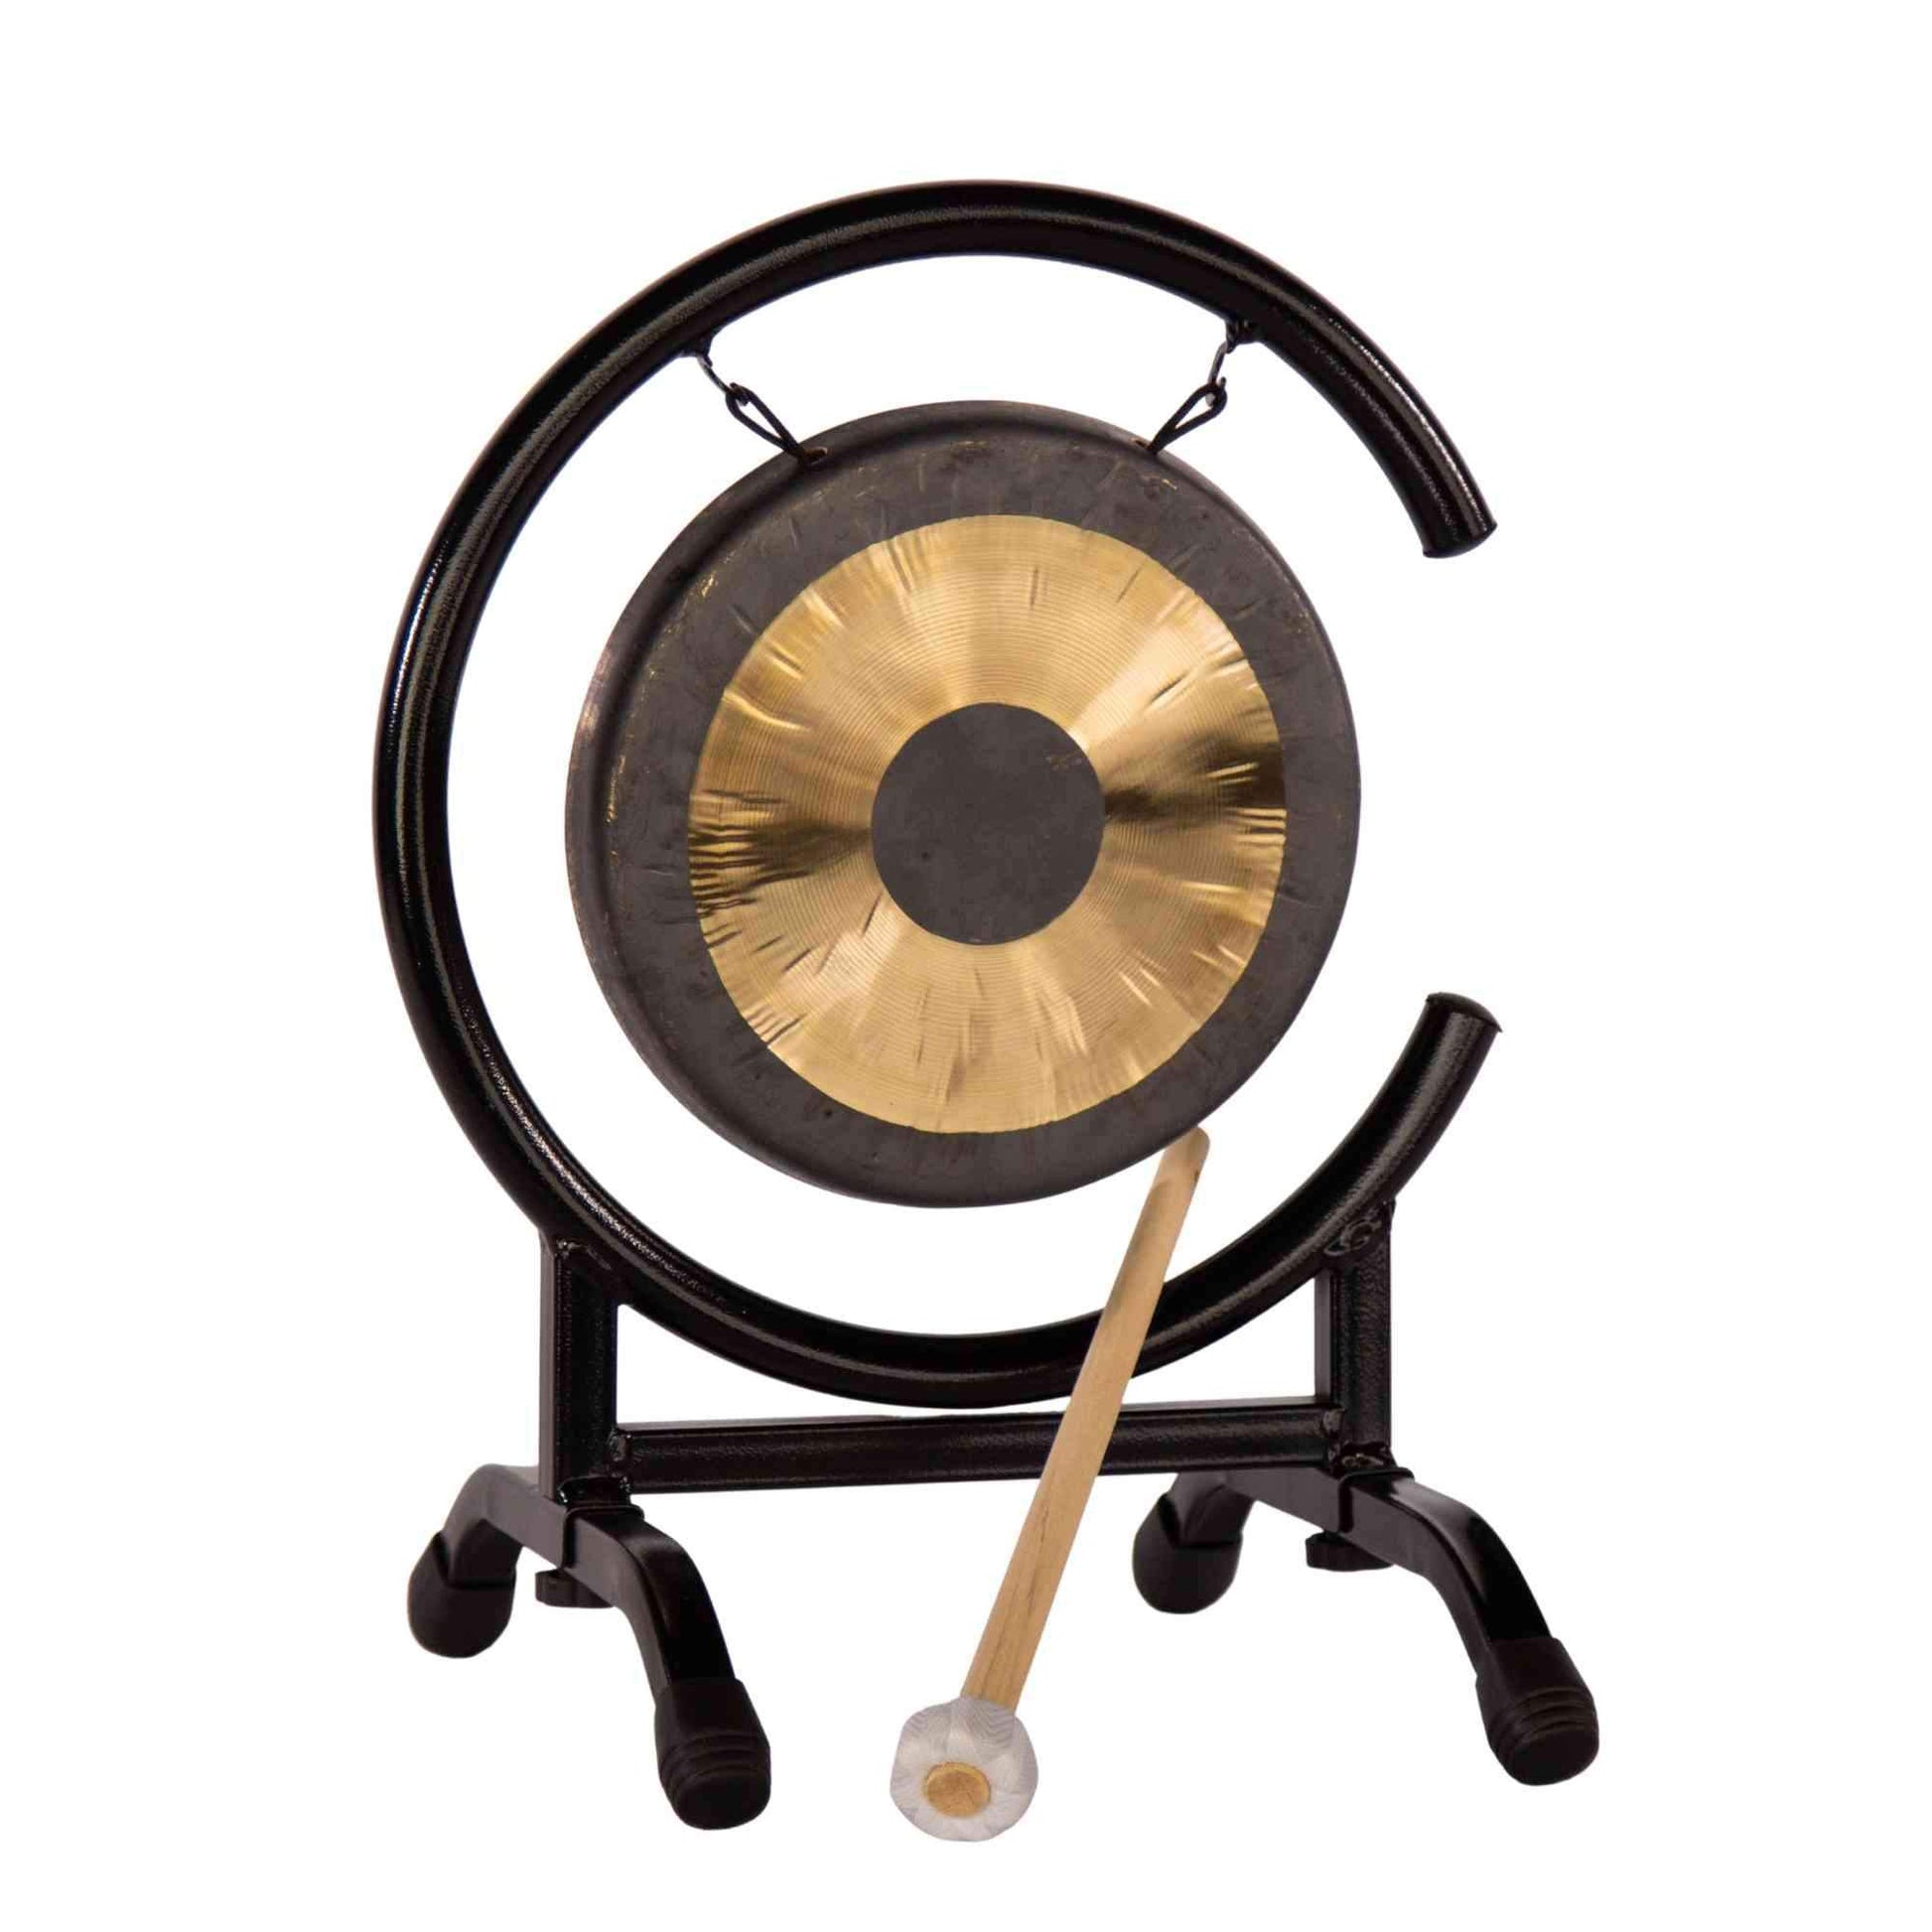 The Gong 6" to 12" Chau Gongs on Metal C Stand